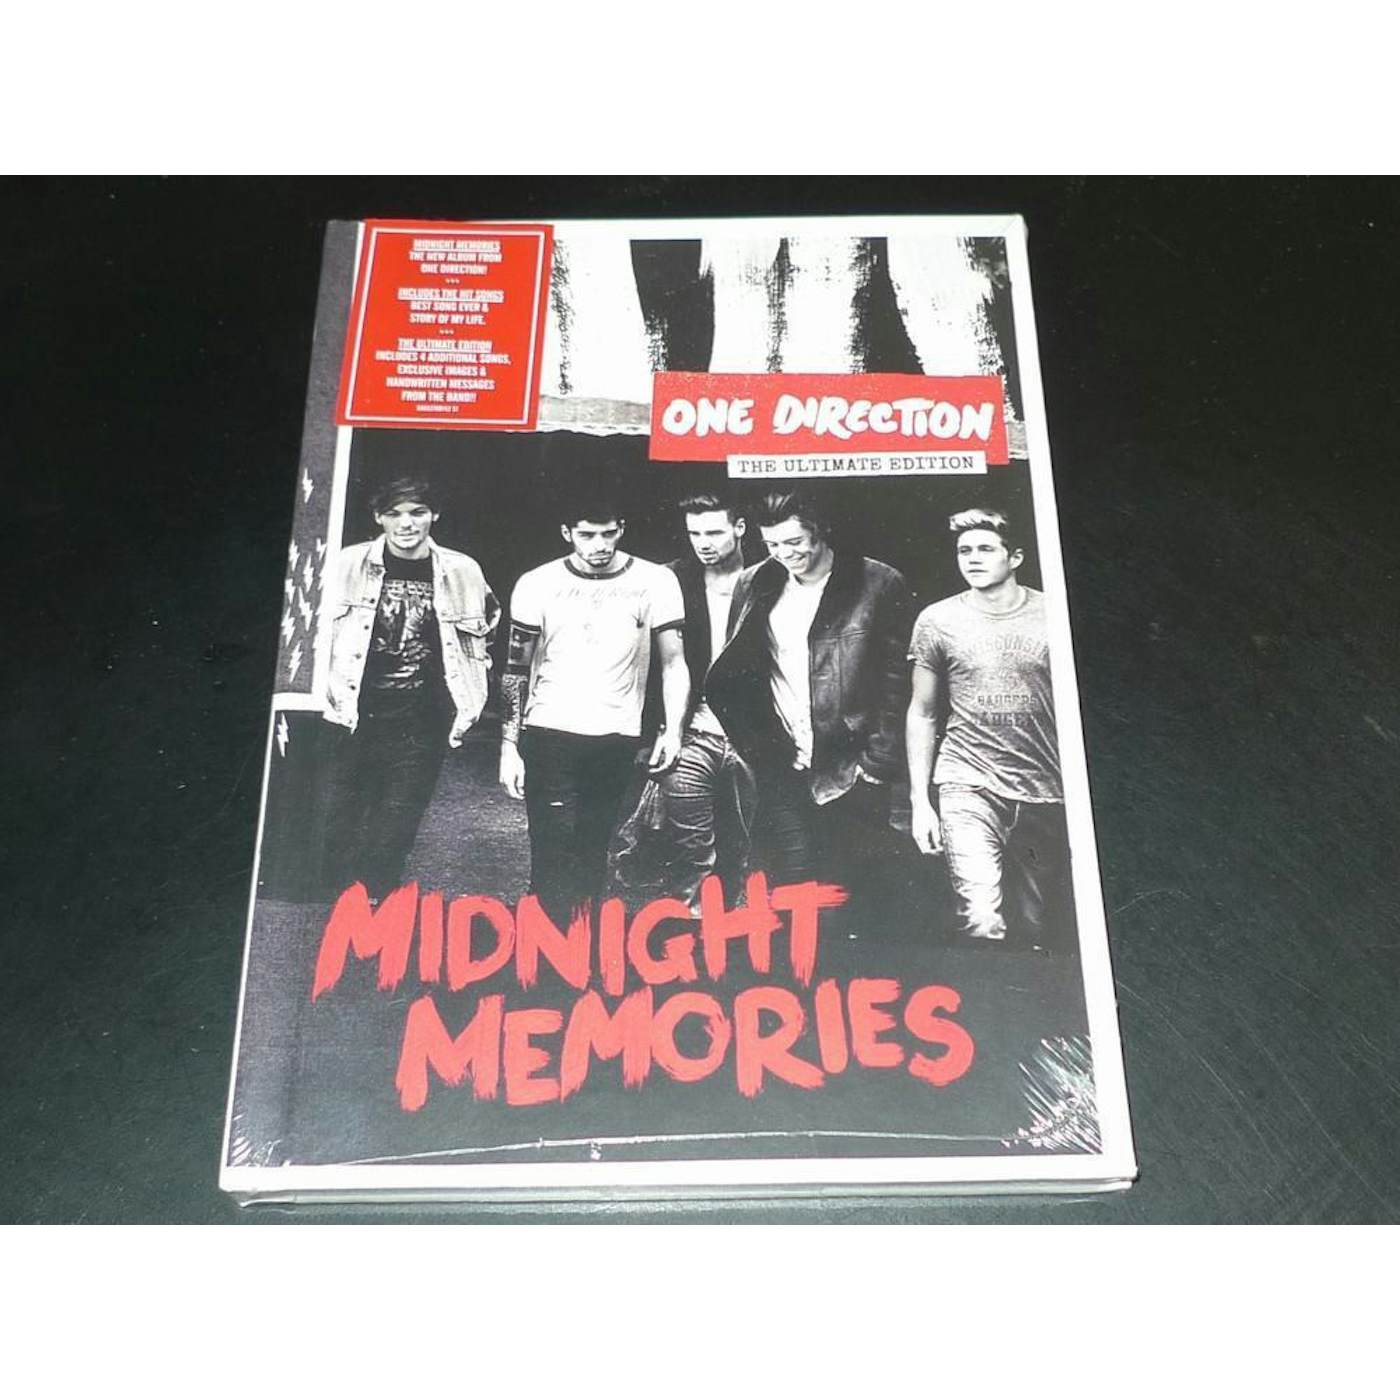 One Direction MIDNIGHT MEMORIES CD